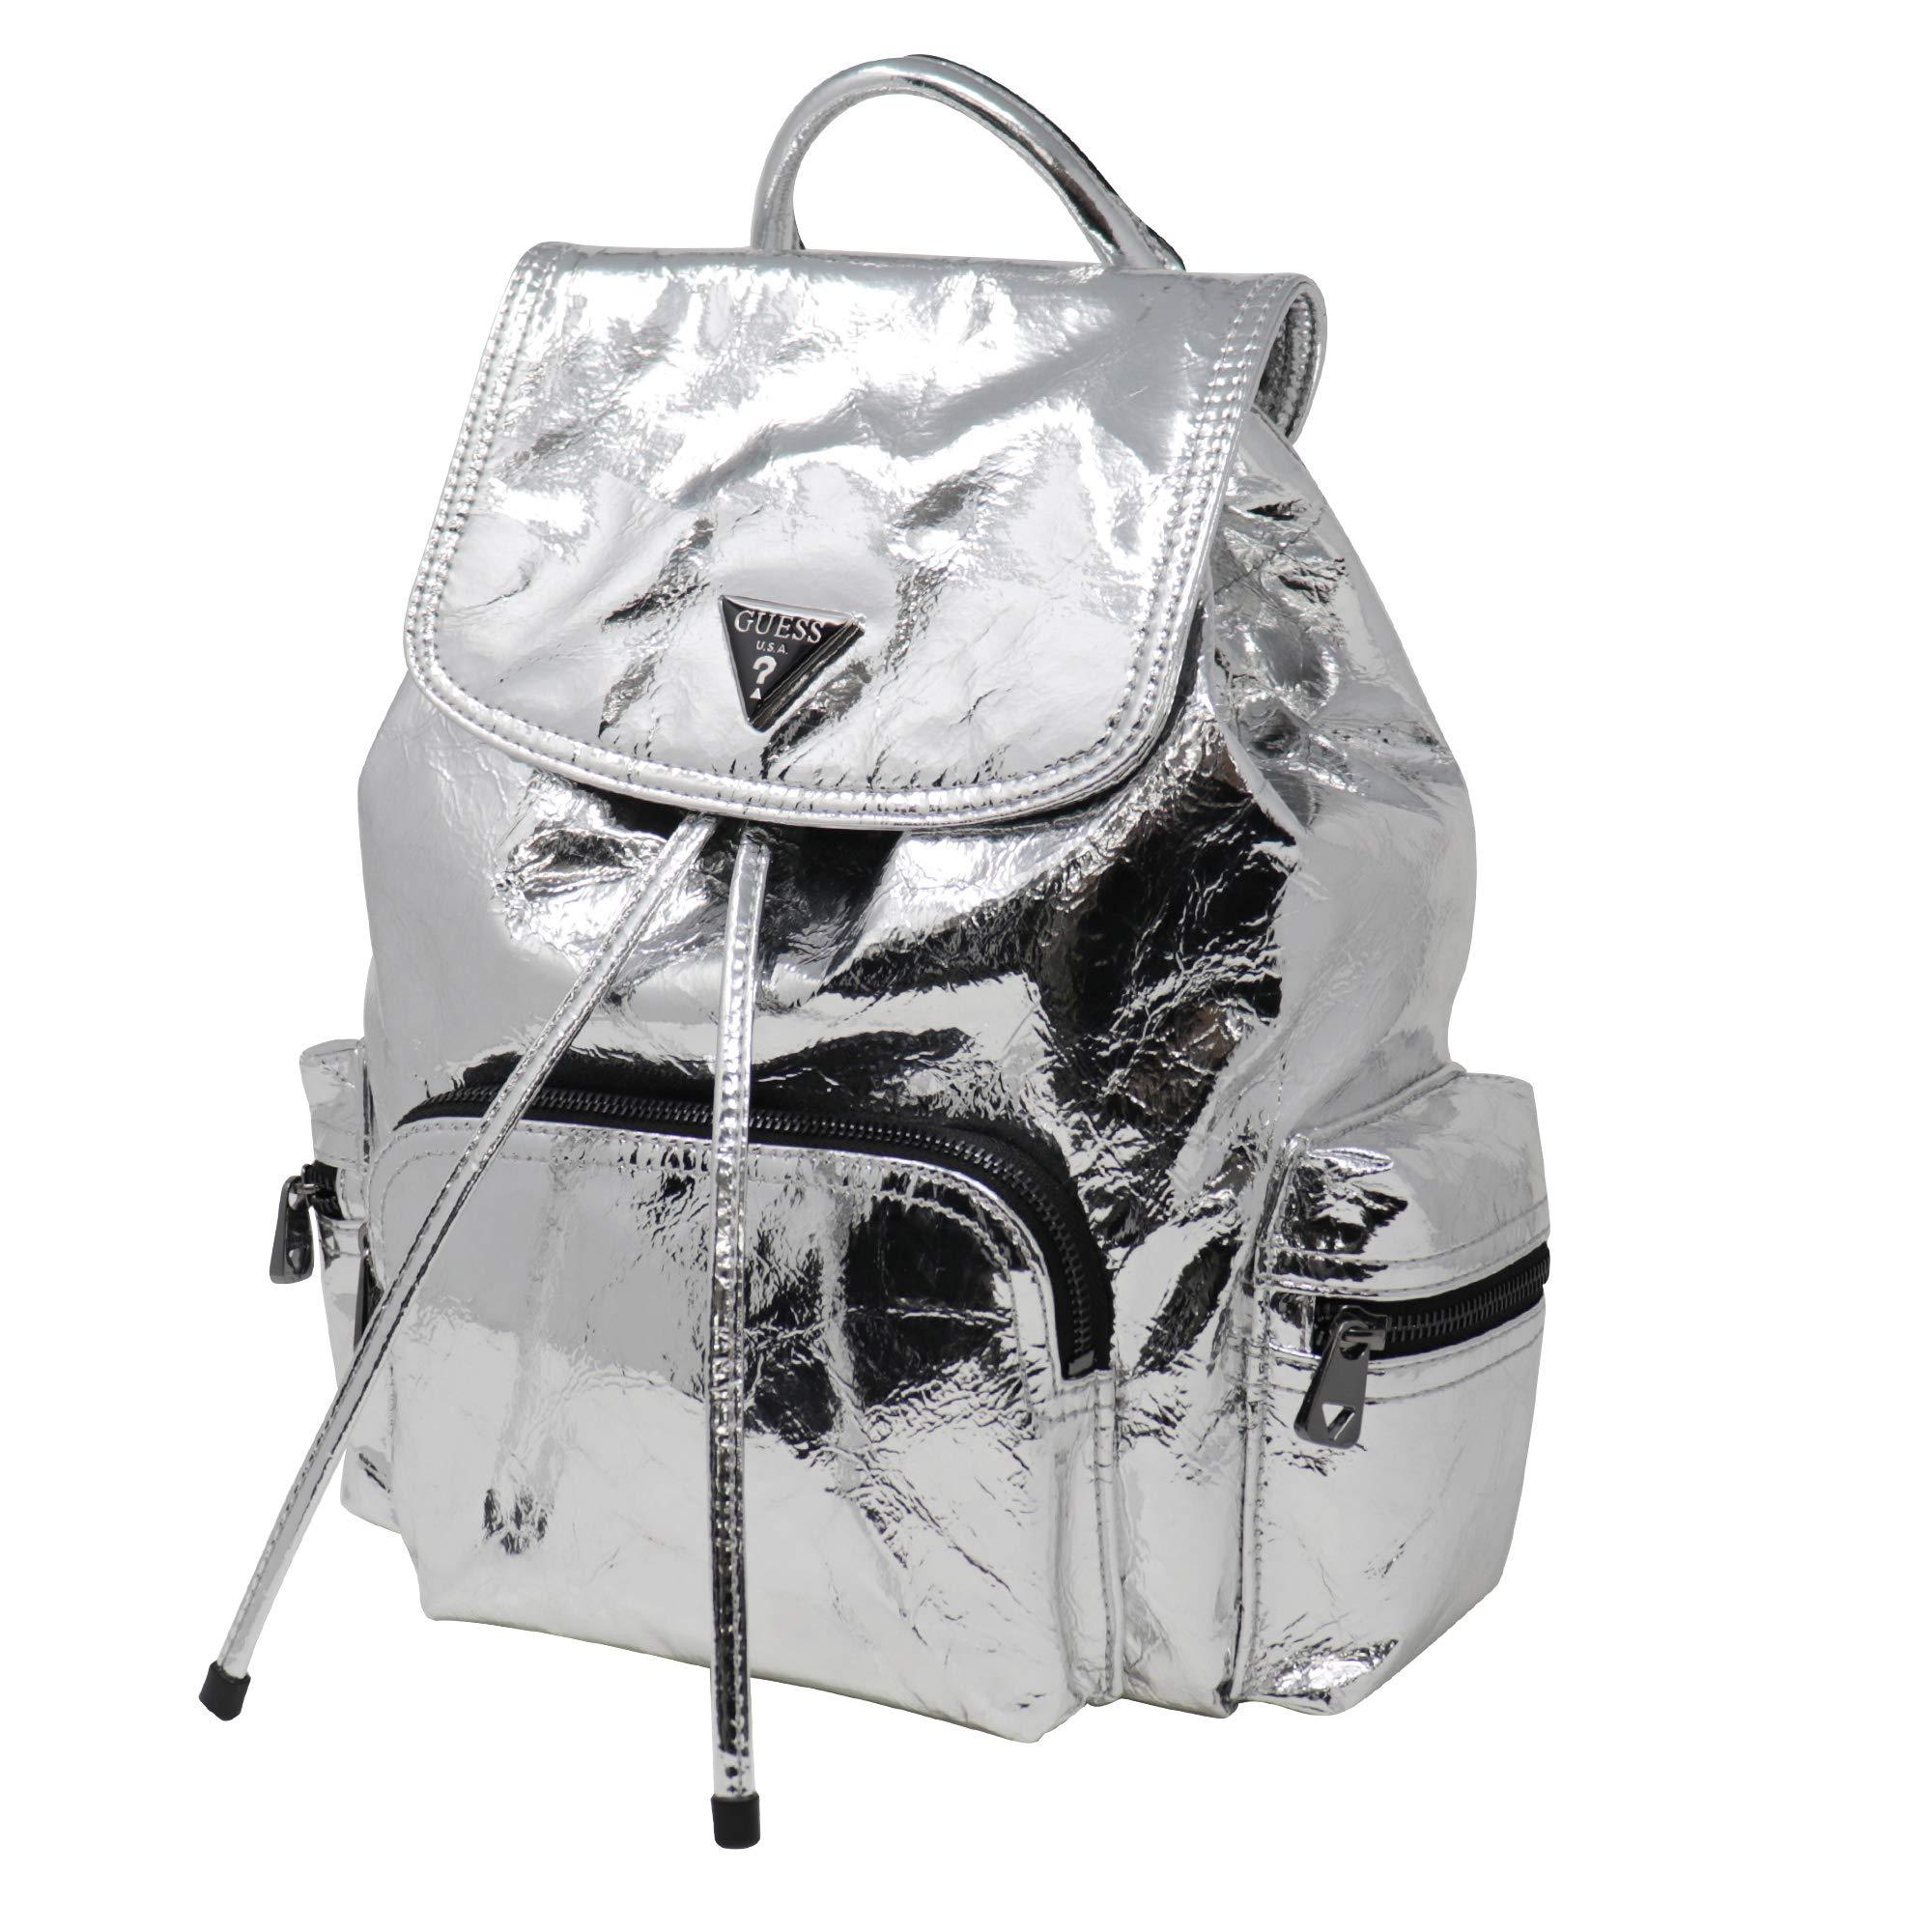 Guess San Diego Large Backpack in Mettallic - Lyst